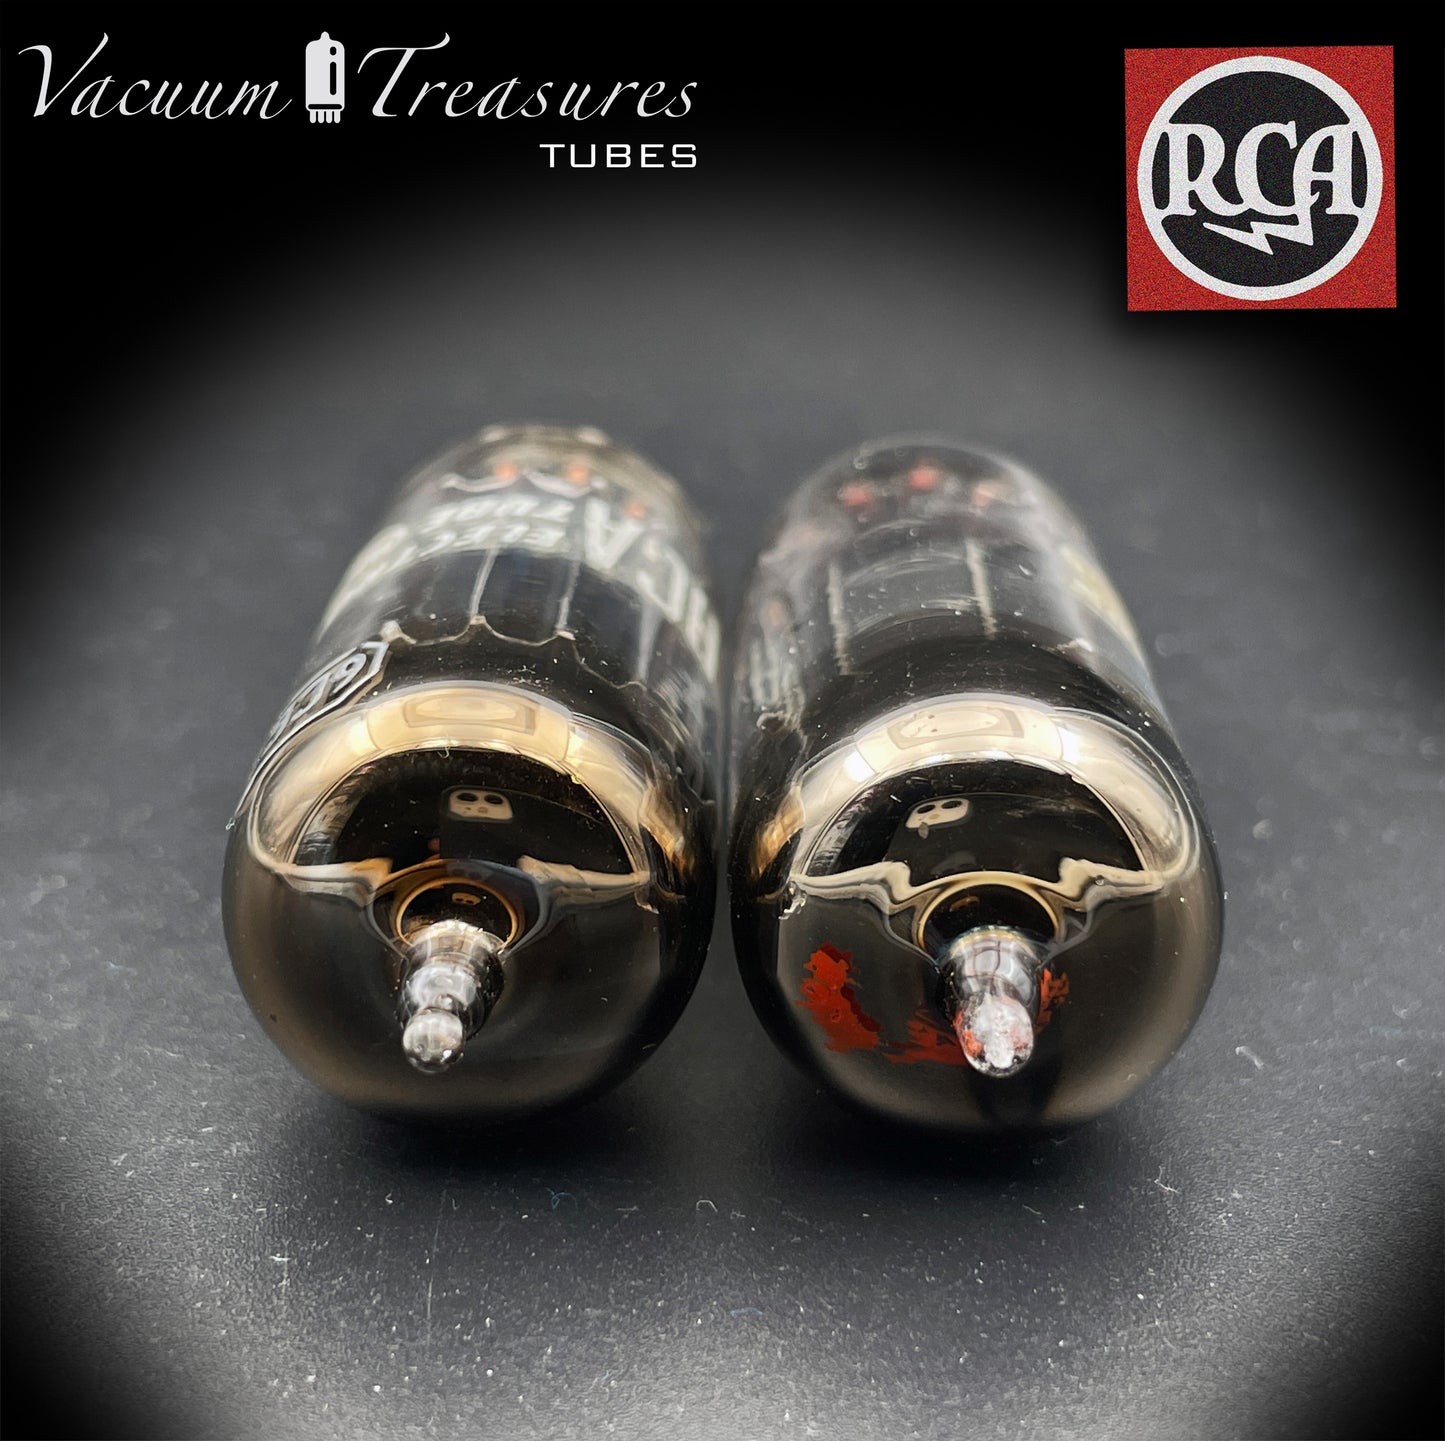 6CG7 ( 6FQ7 ) RCA Triple Black Plates Horse Shoe Getter Tested Pair Tubes Made in USA